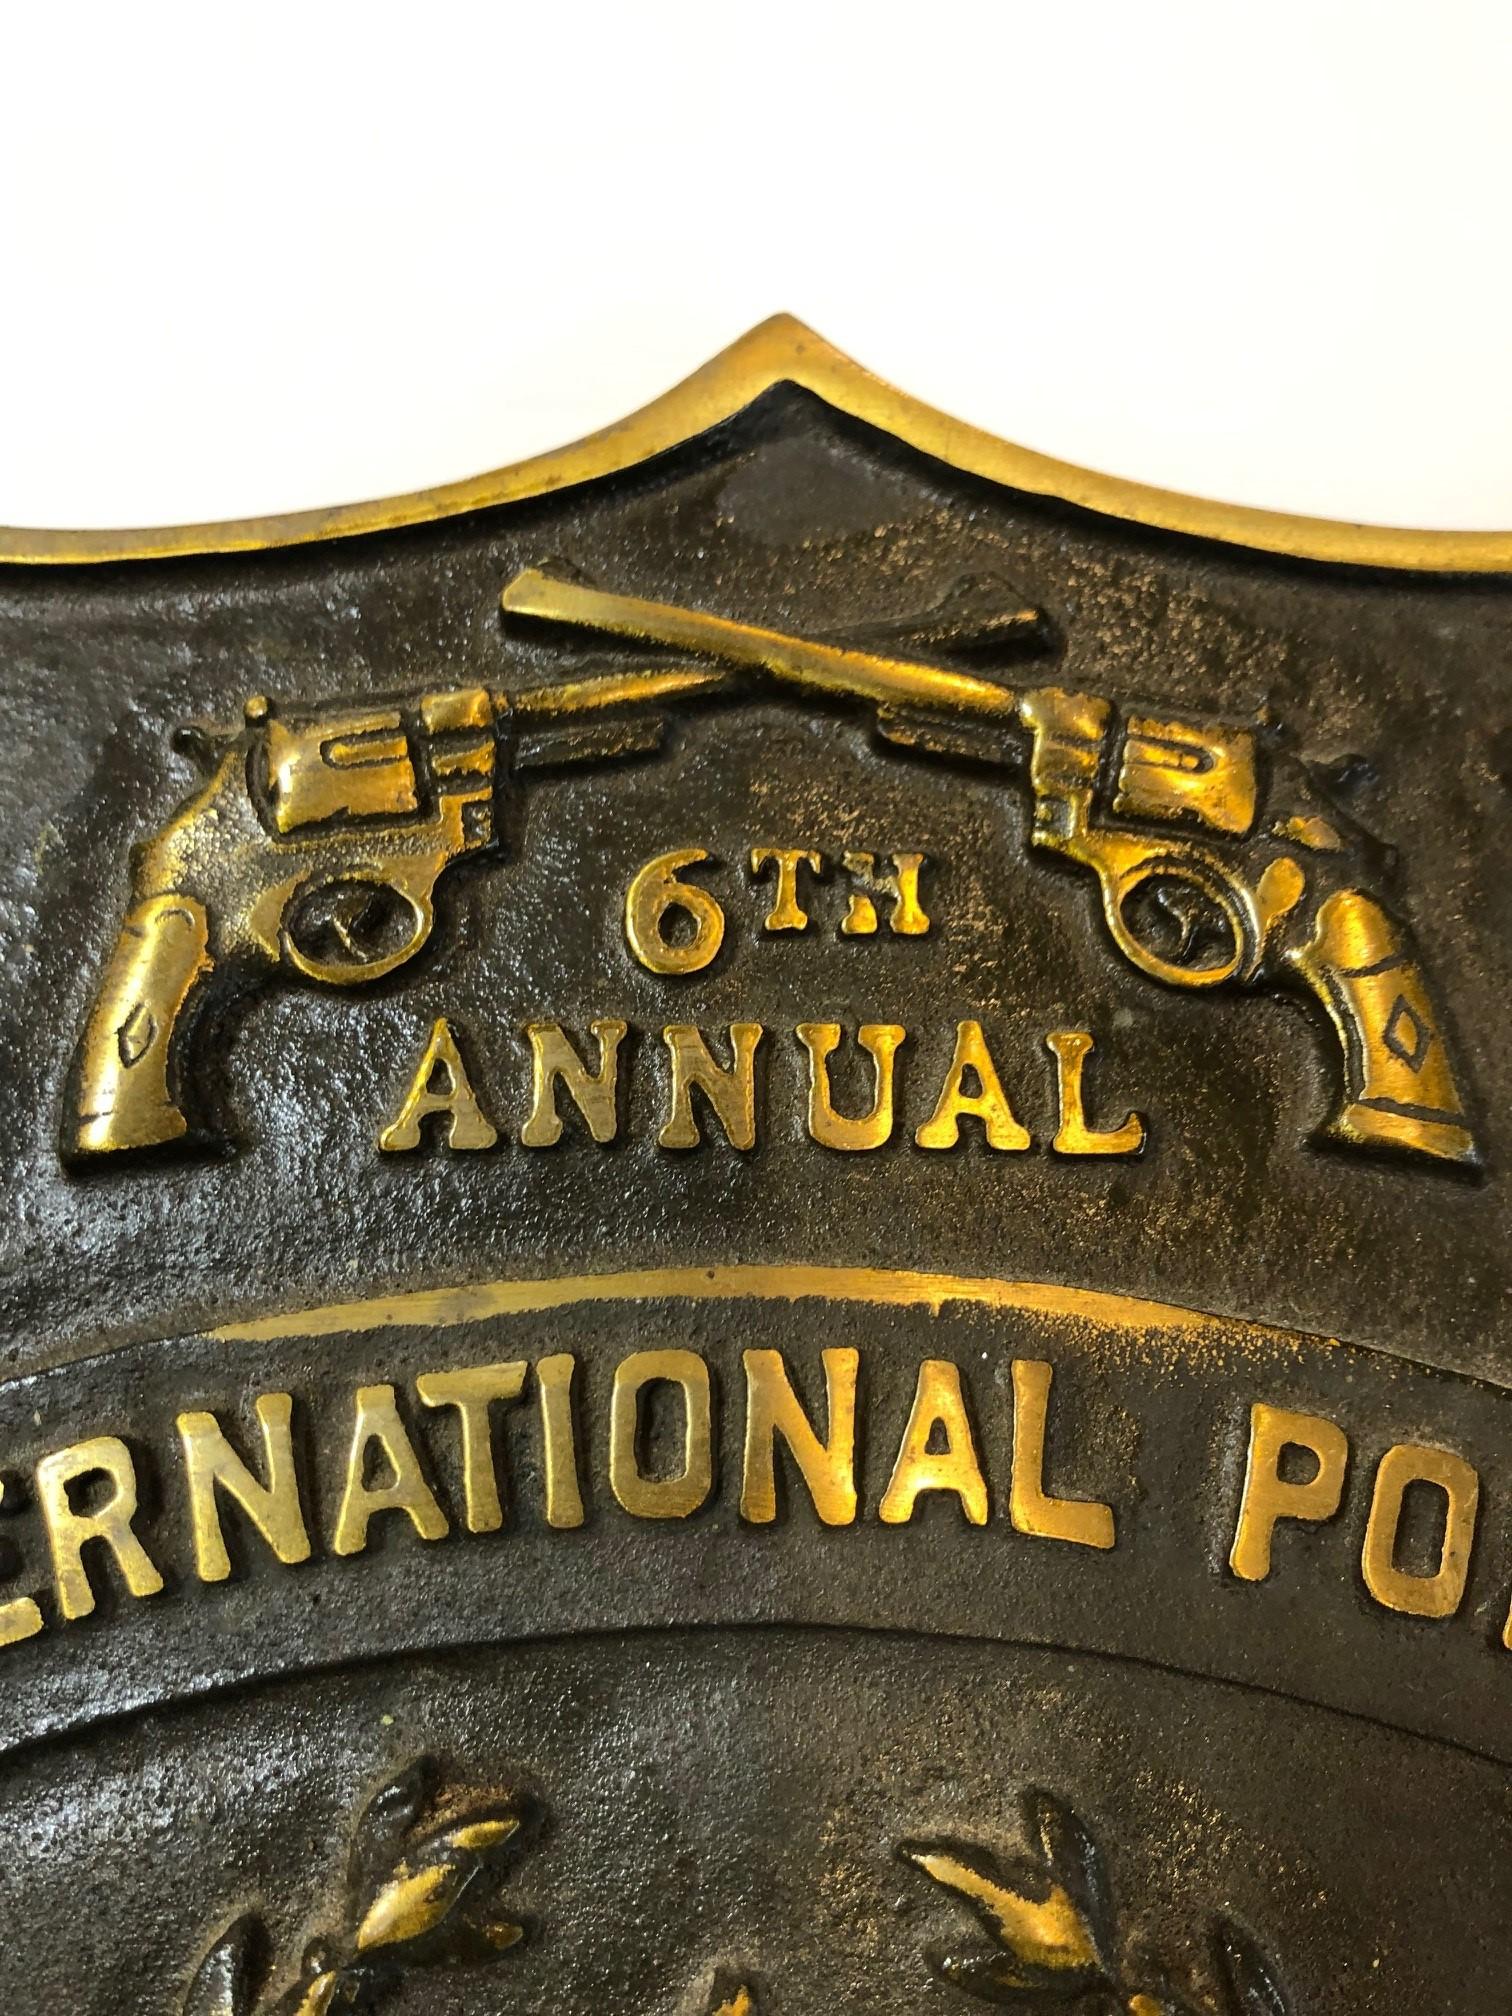 Fabulous Bronze Plaque of The 6th annual International Police Pistol Tournament at the Teaneck Police Pistol Range Teaneck New Jersey.